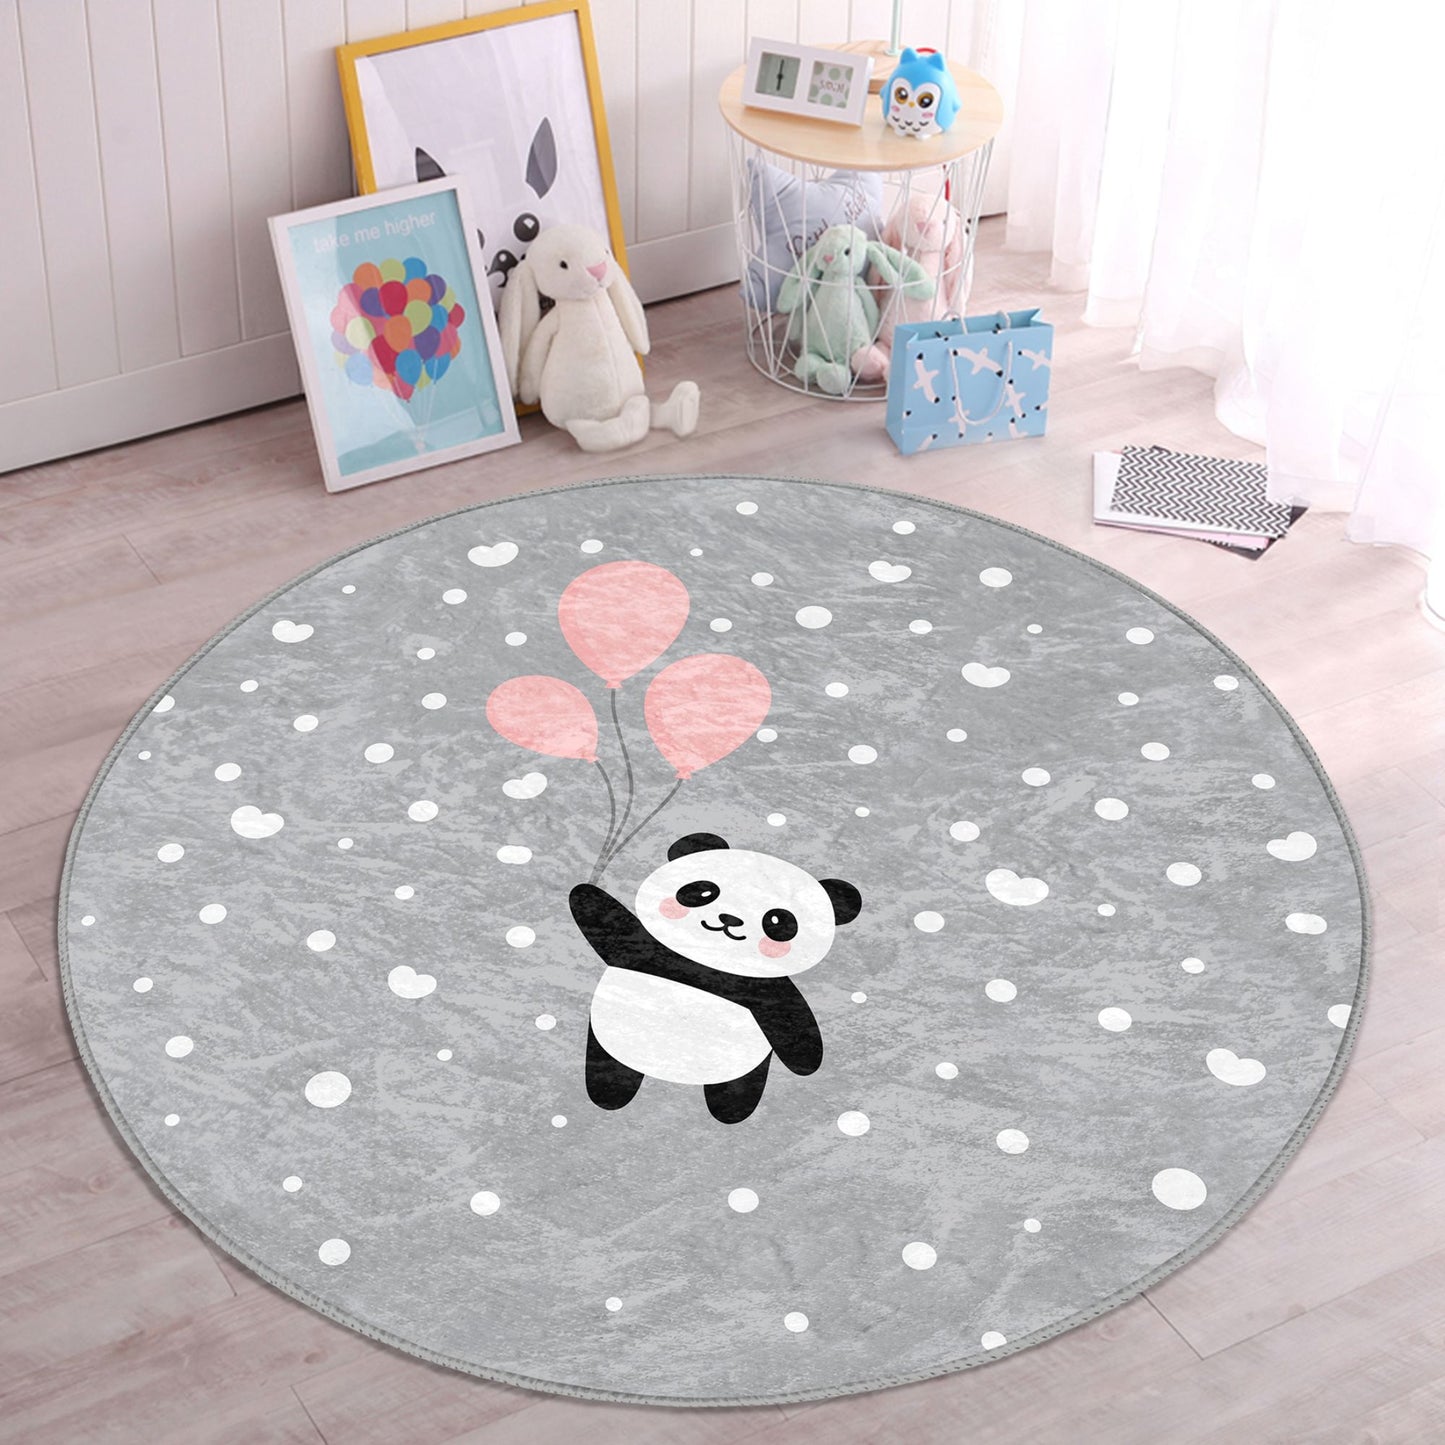 Colorful Kids Rug featuring Panda and Balloon